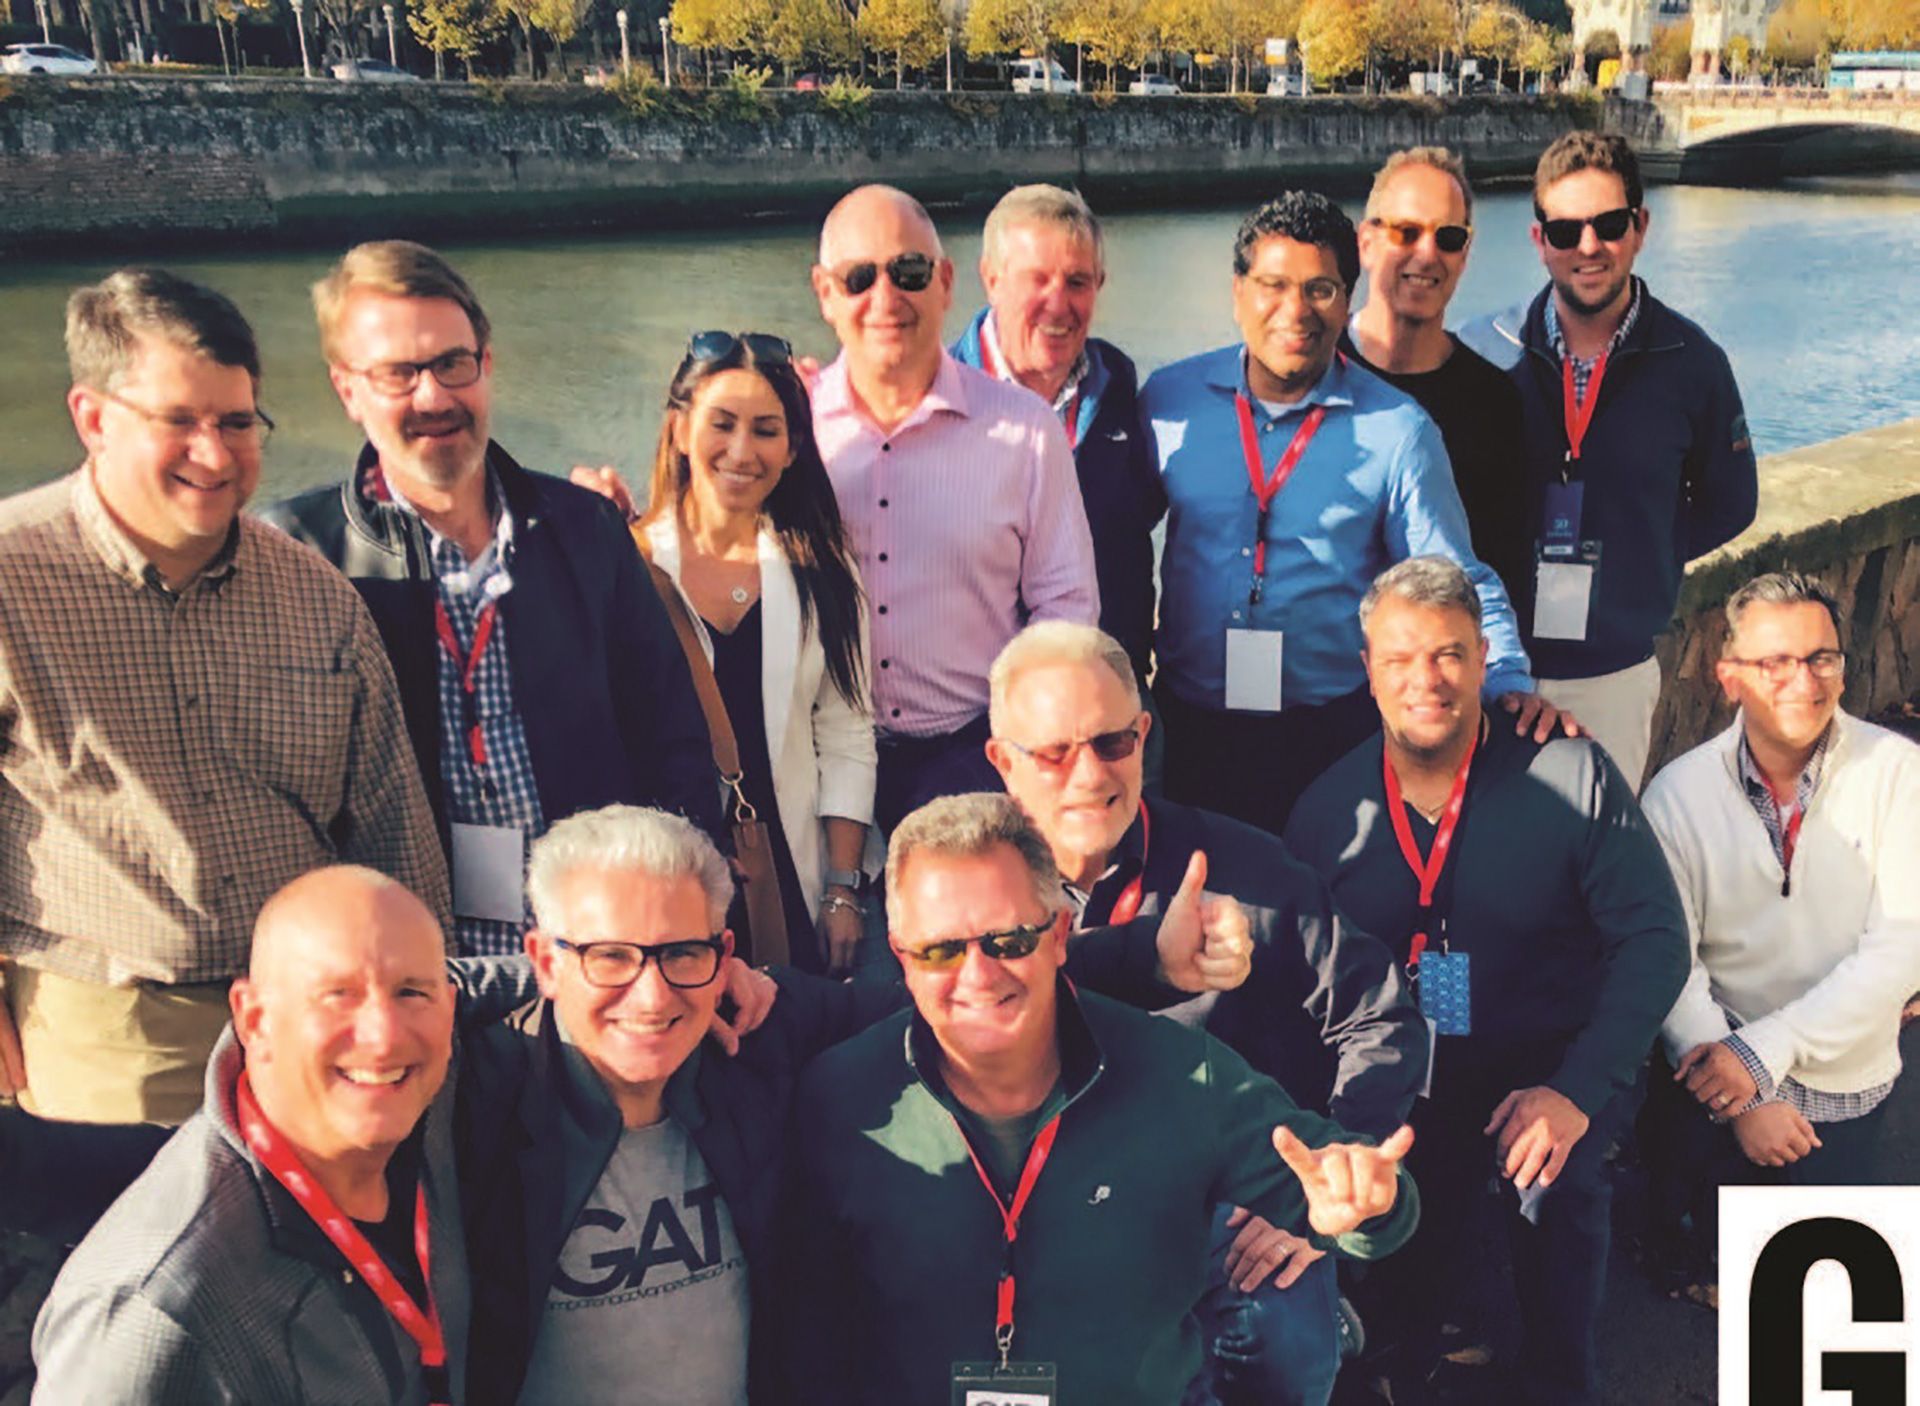 THEY GAIN IN SPAIN: Drs. Stoner (front row, second from right) and Naples (front row, right) with fellow doctors who set up a private surgical course in San Sebastián, Spain